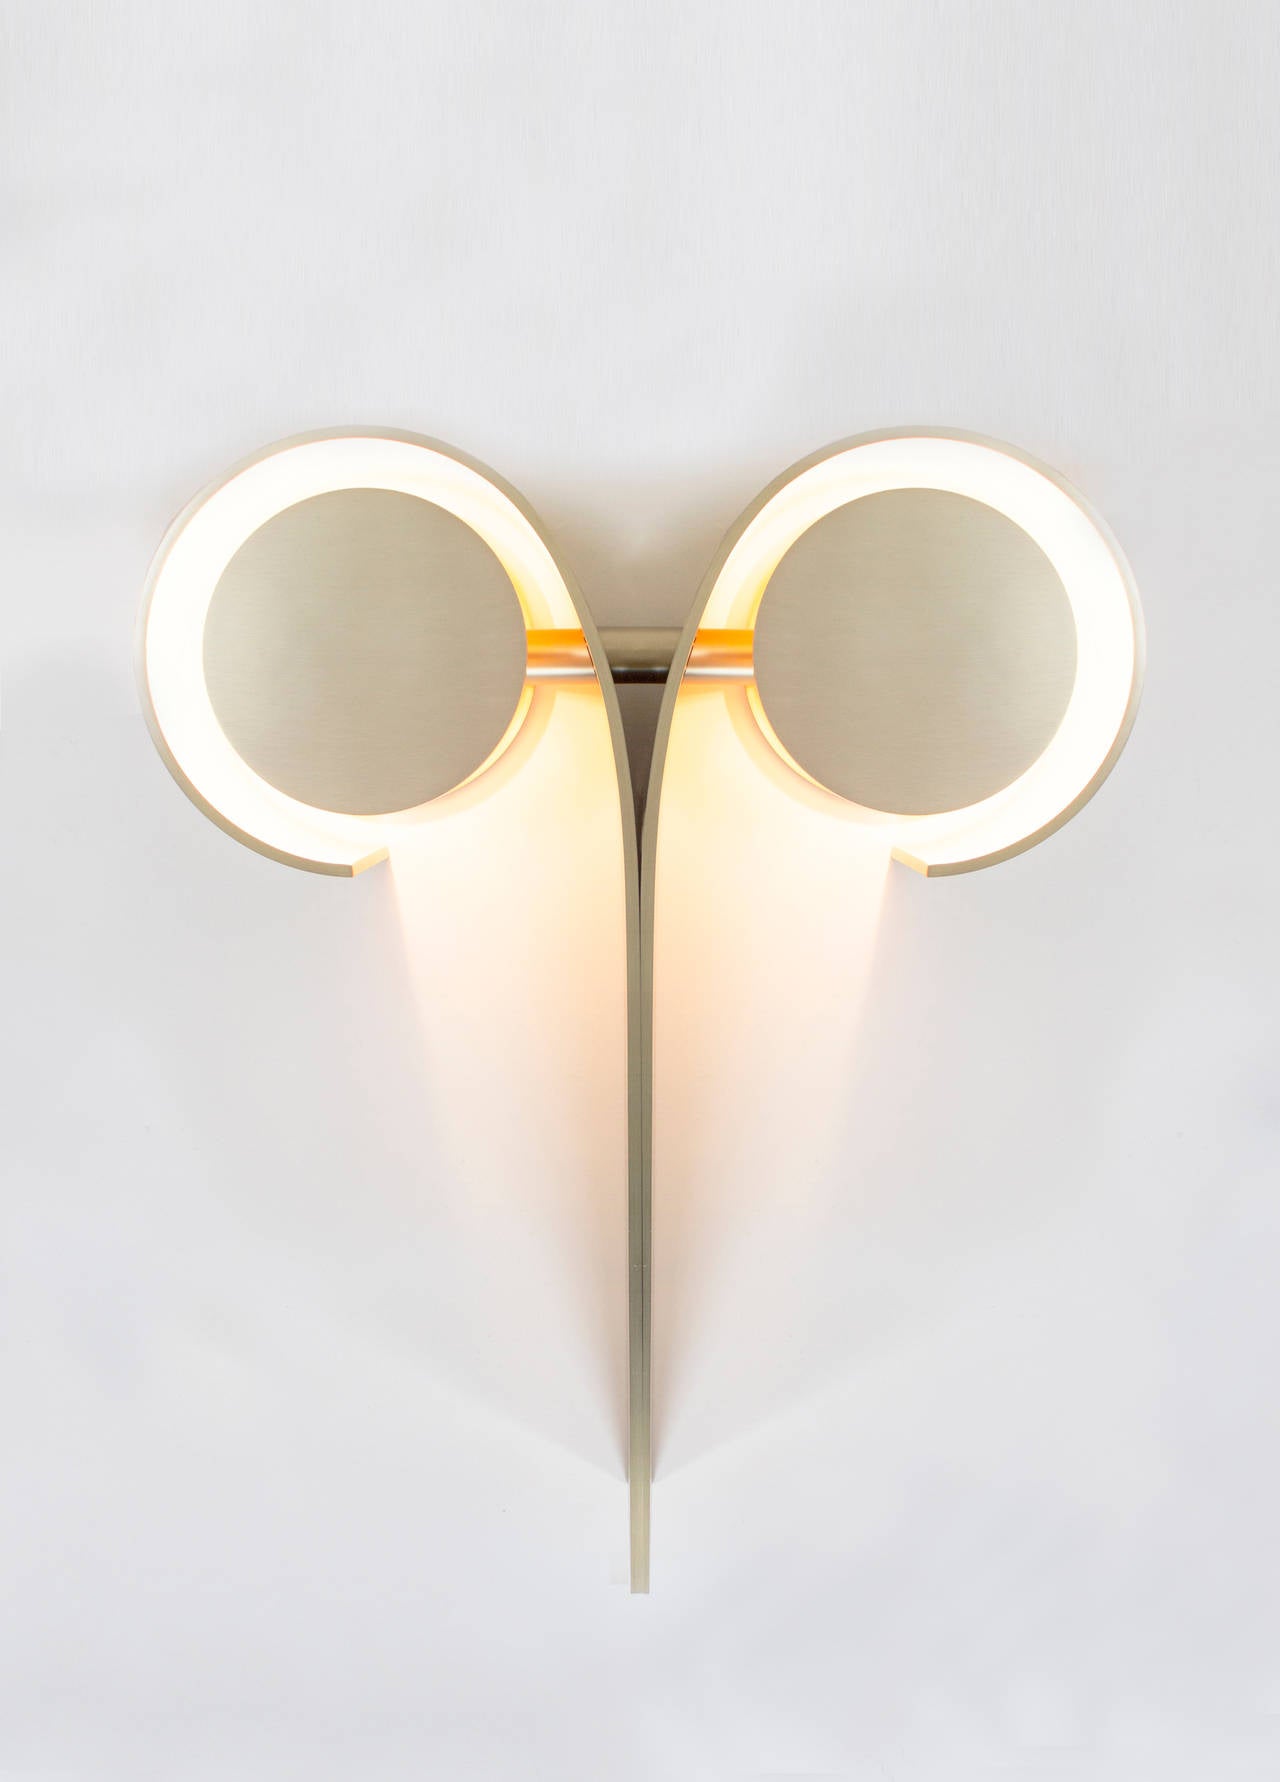 Italian Contemporary 'Khnum' Sconce by Material Lust, 2015 For Sale